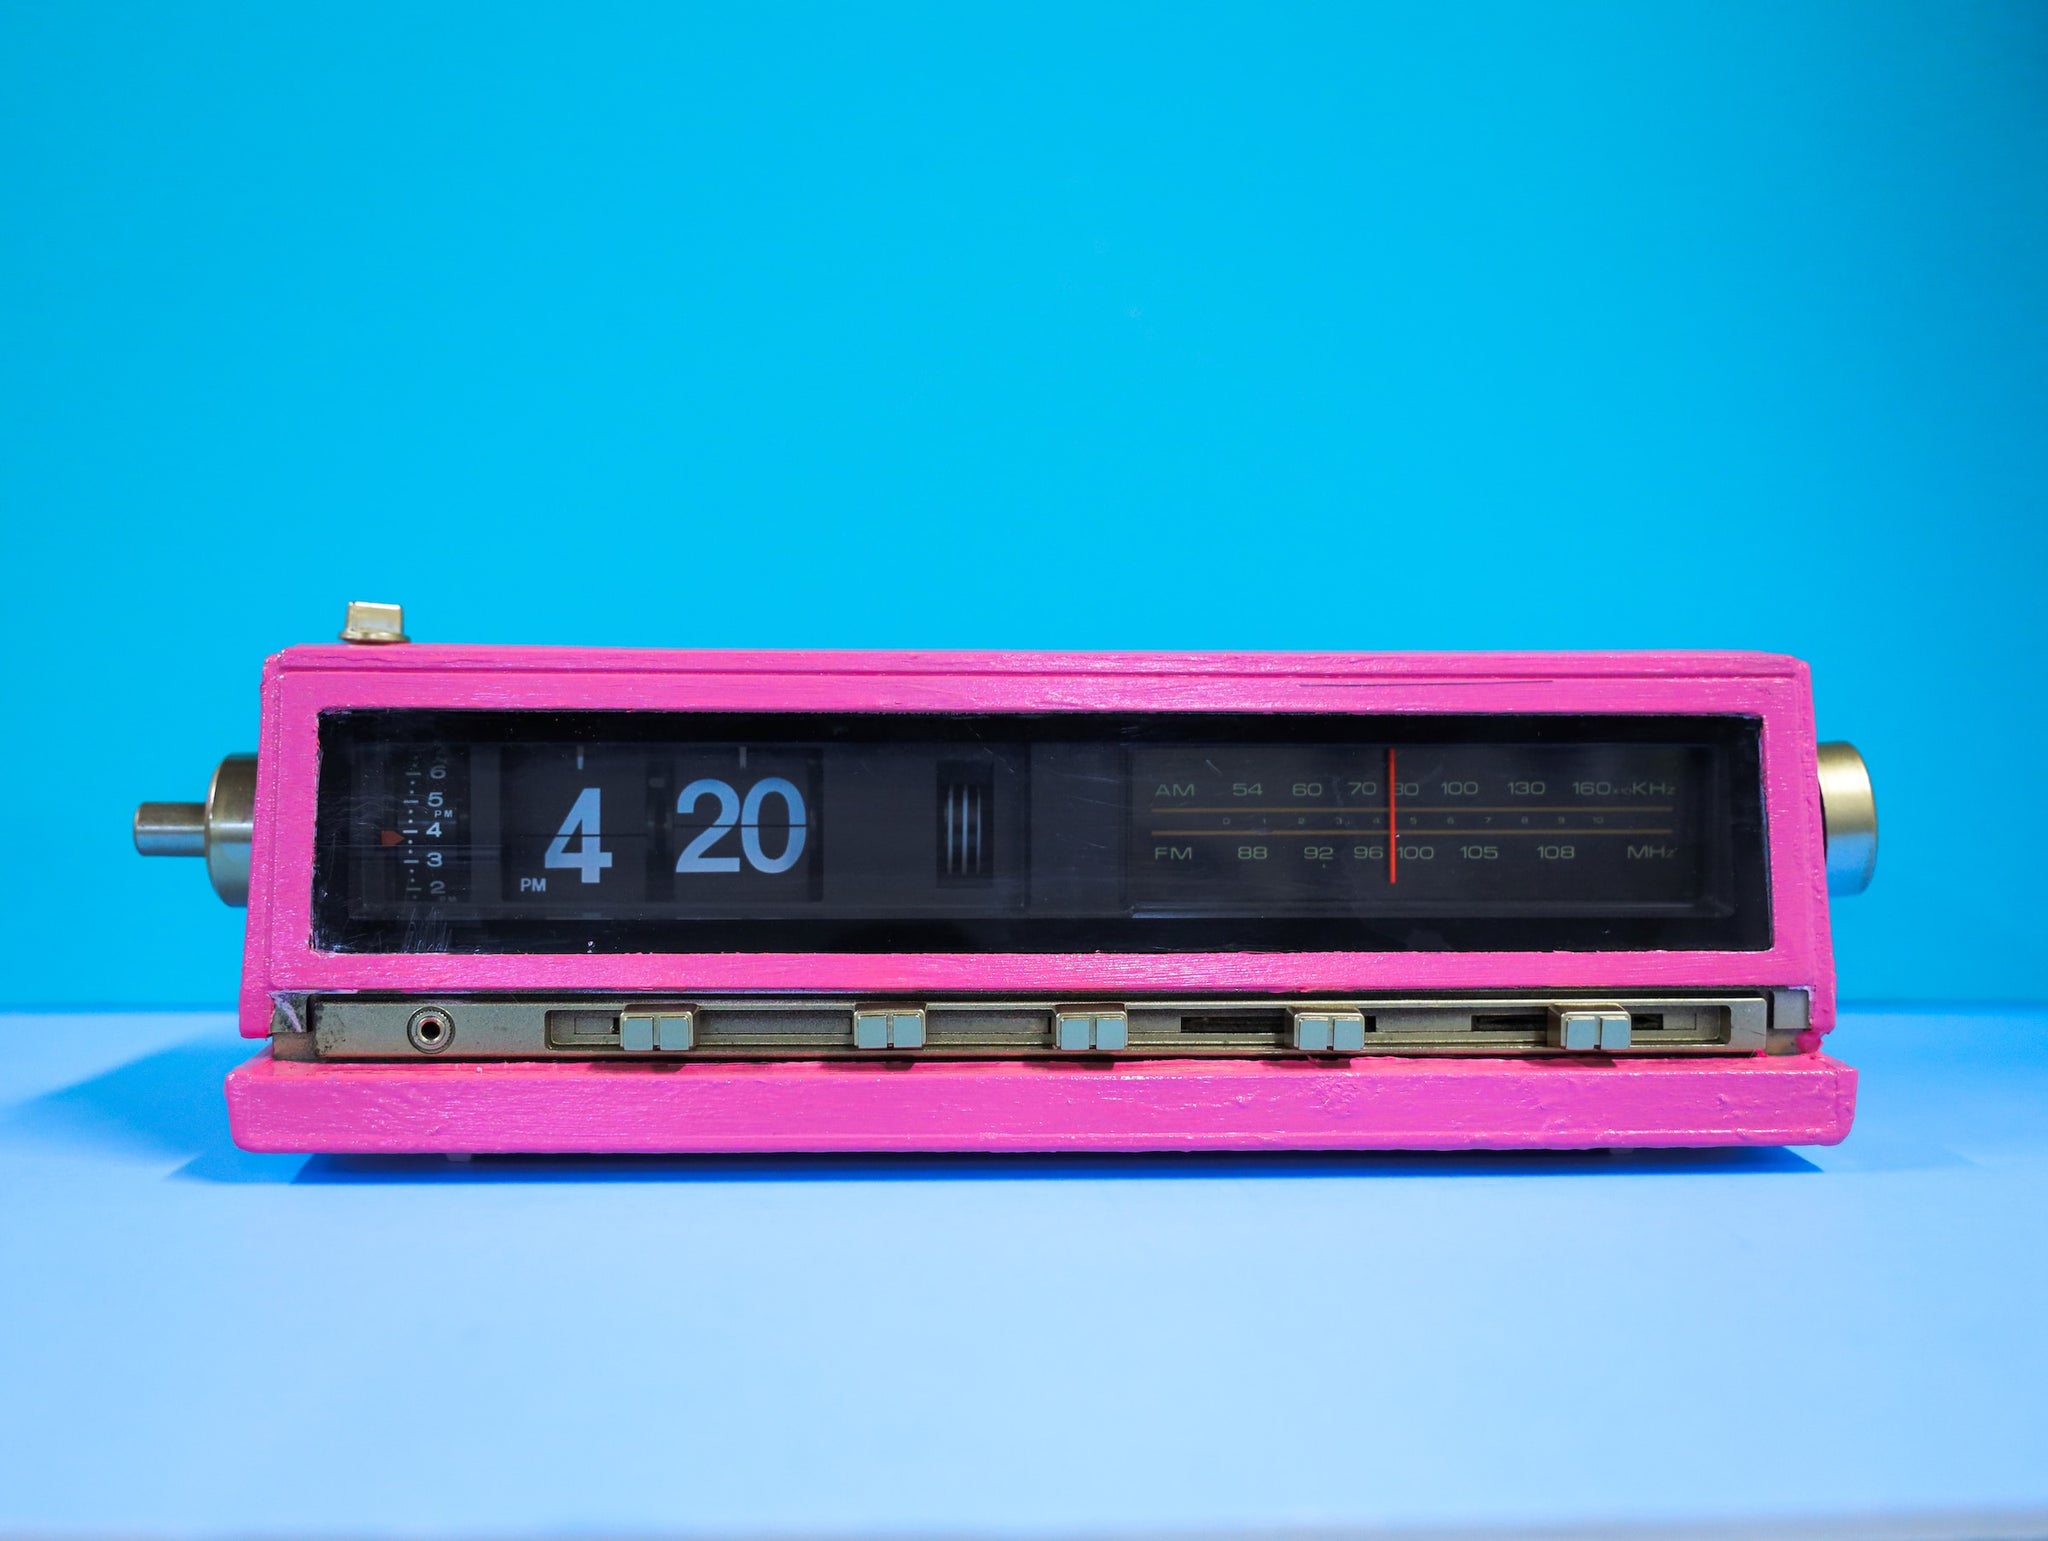 A pink radio dialed to 420, by Joshua Coleman via UNSPLASH